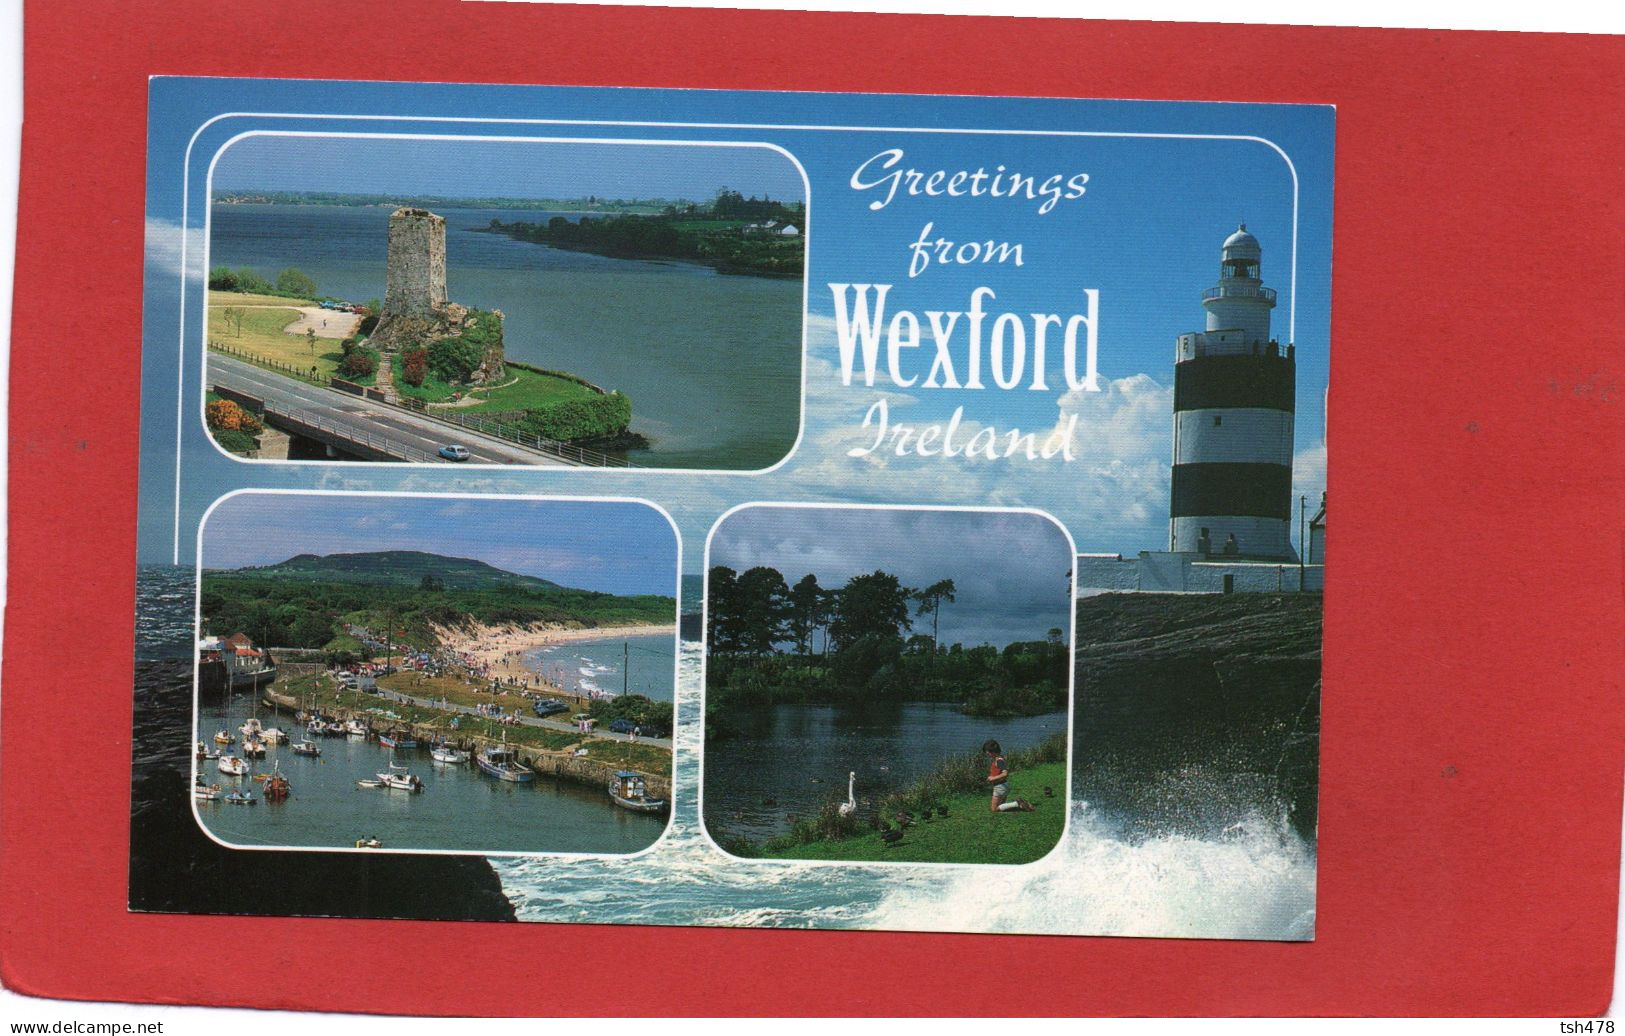 IRLANDE---Greetings From WEXFORD---multi-vues---voir 2 Scans - Wexford